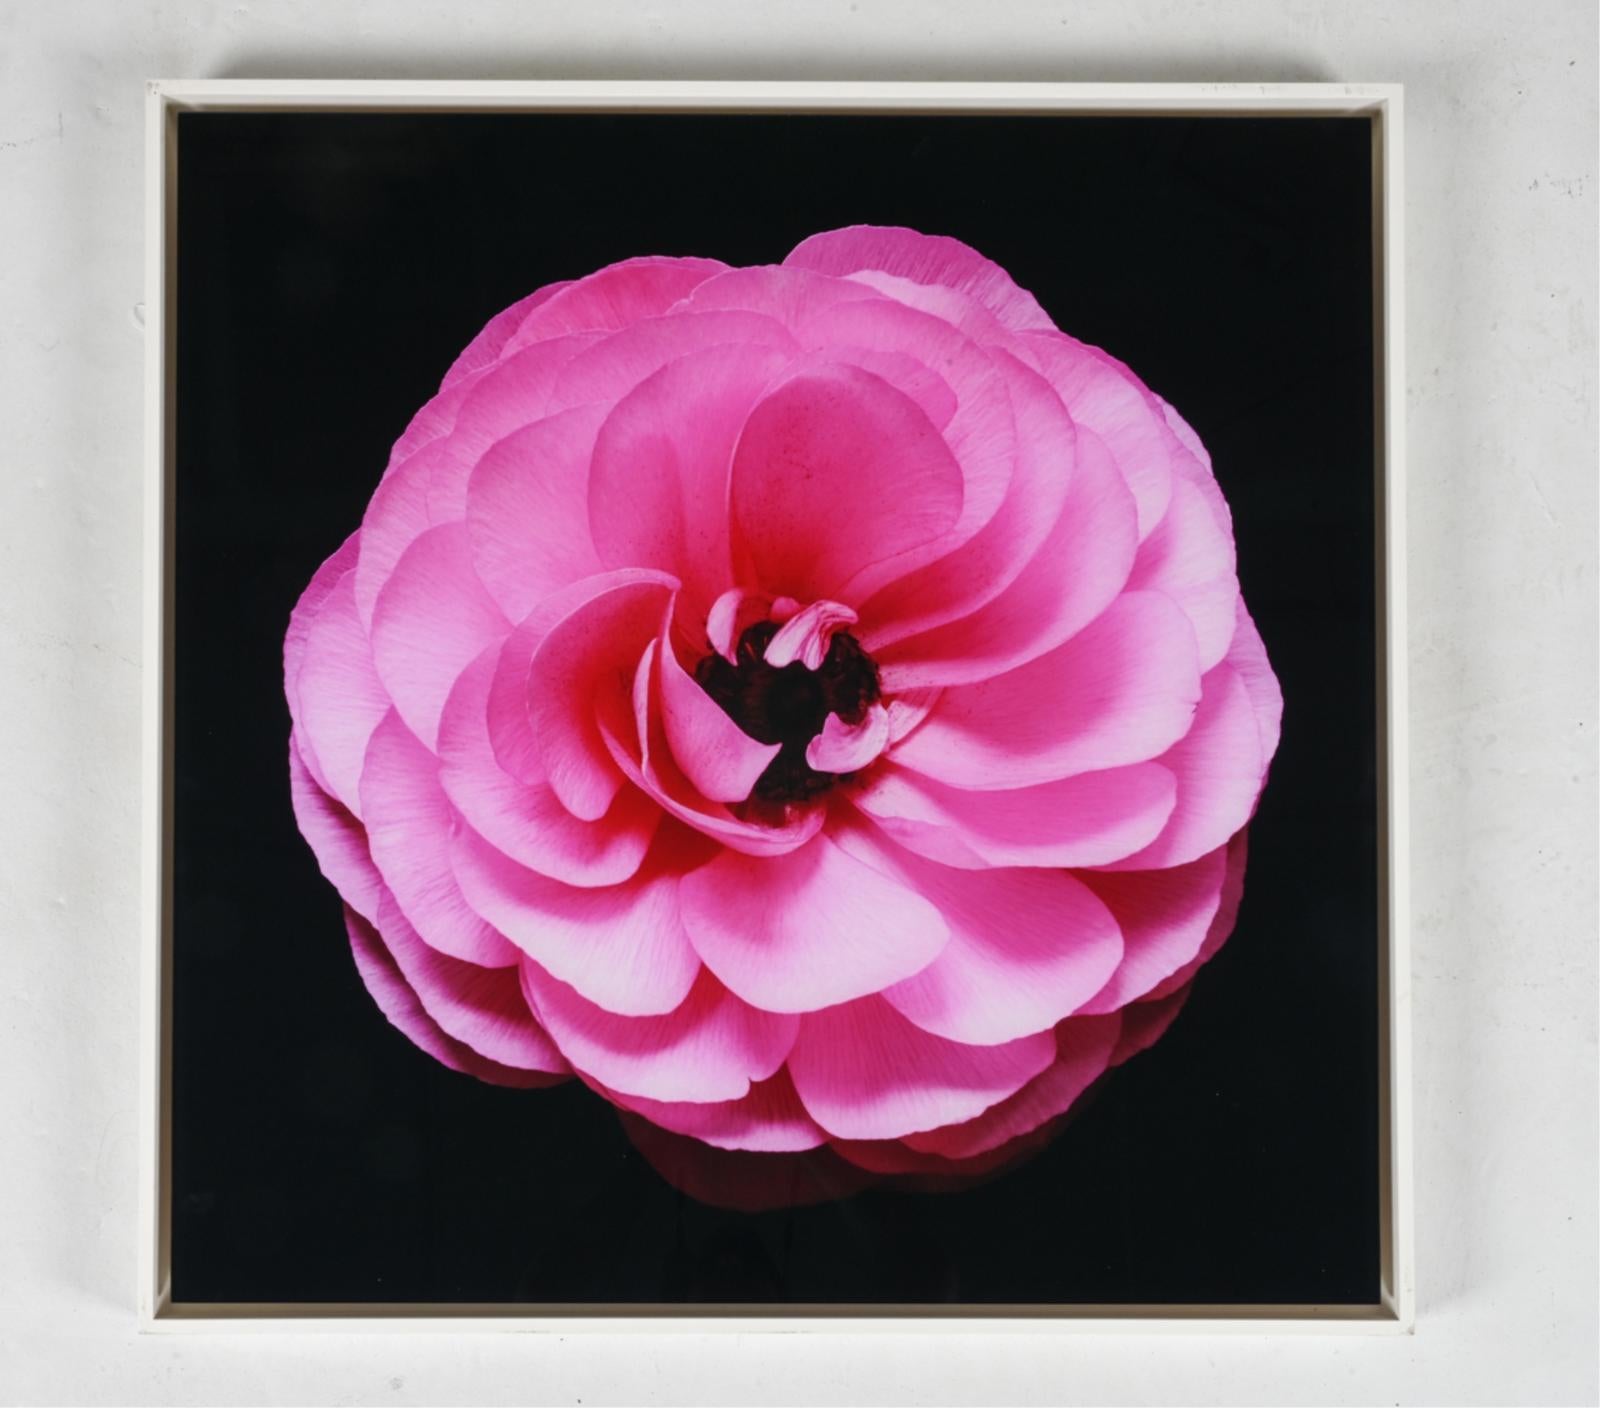 Christopher Beane Color Photograph - Ranuculus series - "Perfect Pink"